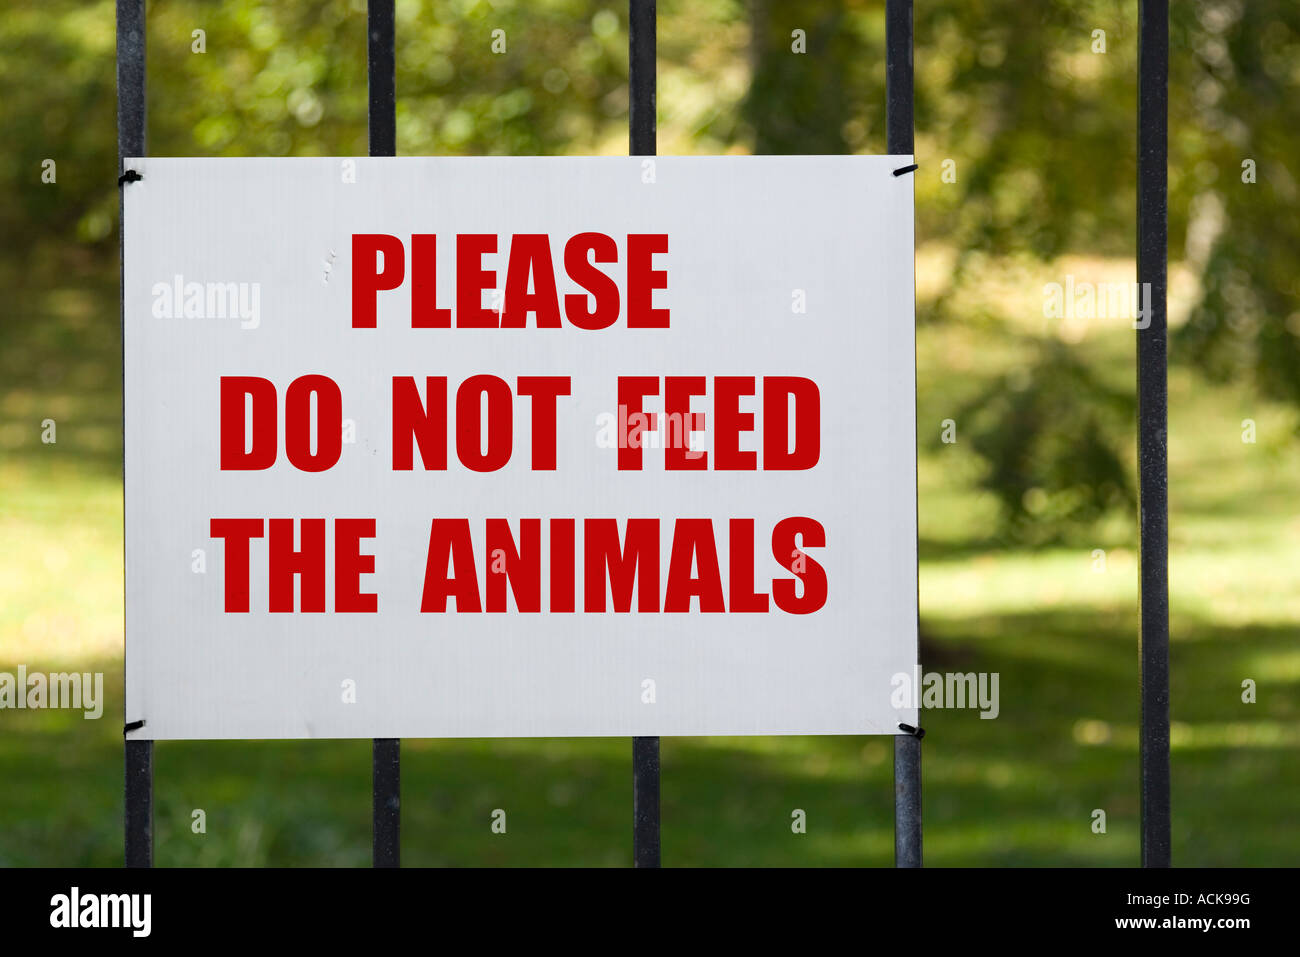 please-do-not-feed-the-animals-sign-stock-photo-alamy